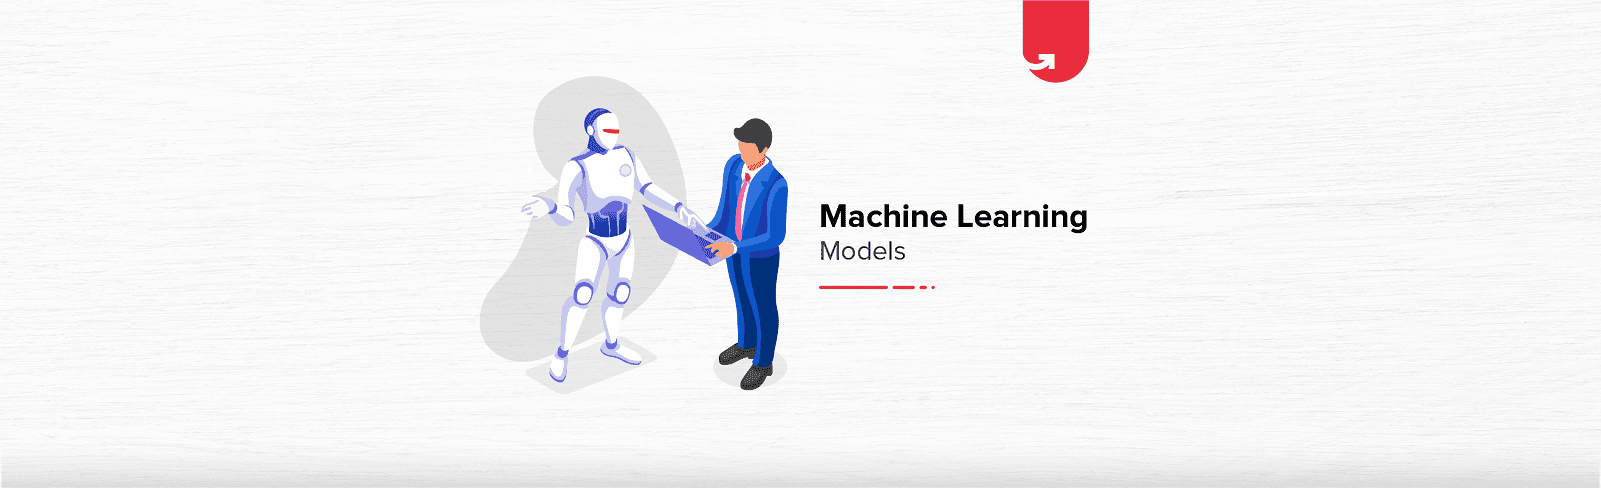 Top 5 Machine Learning Models Explained For Beginners